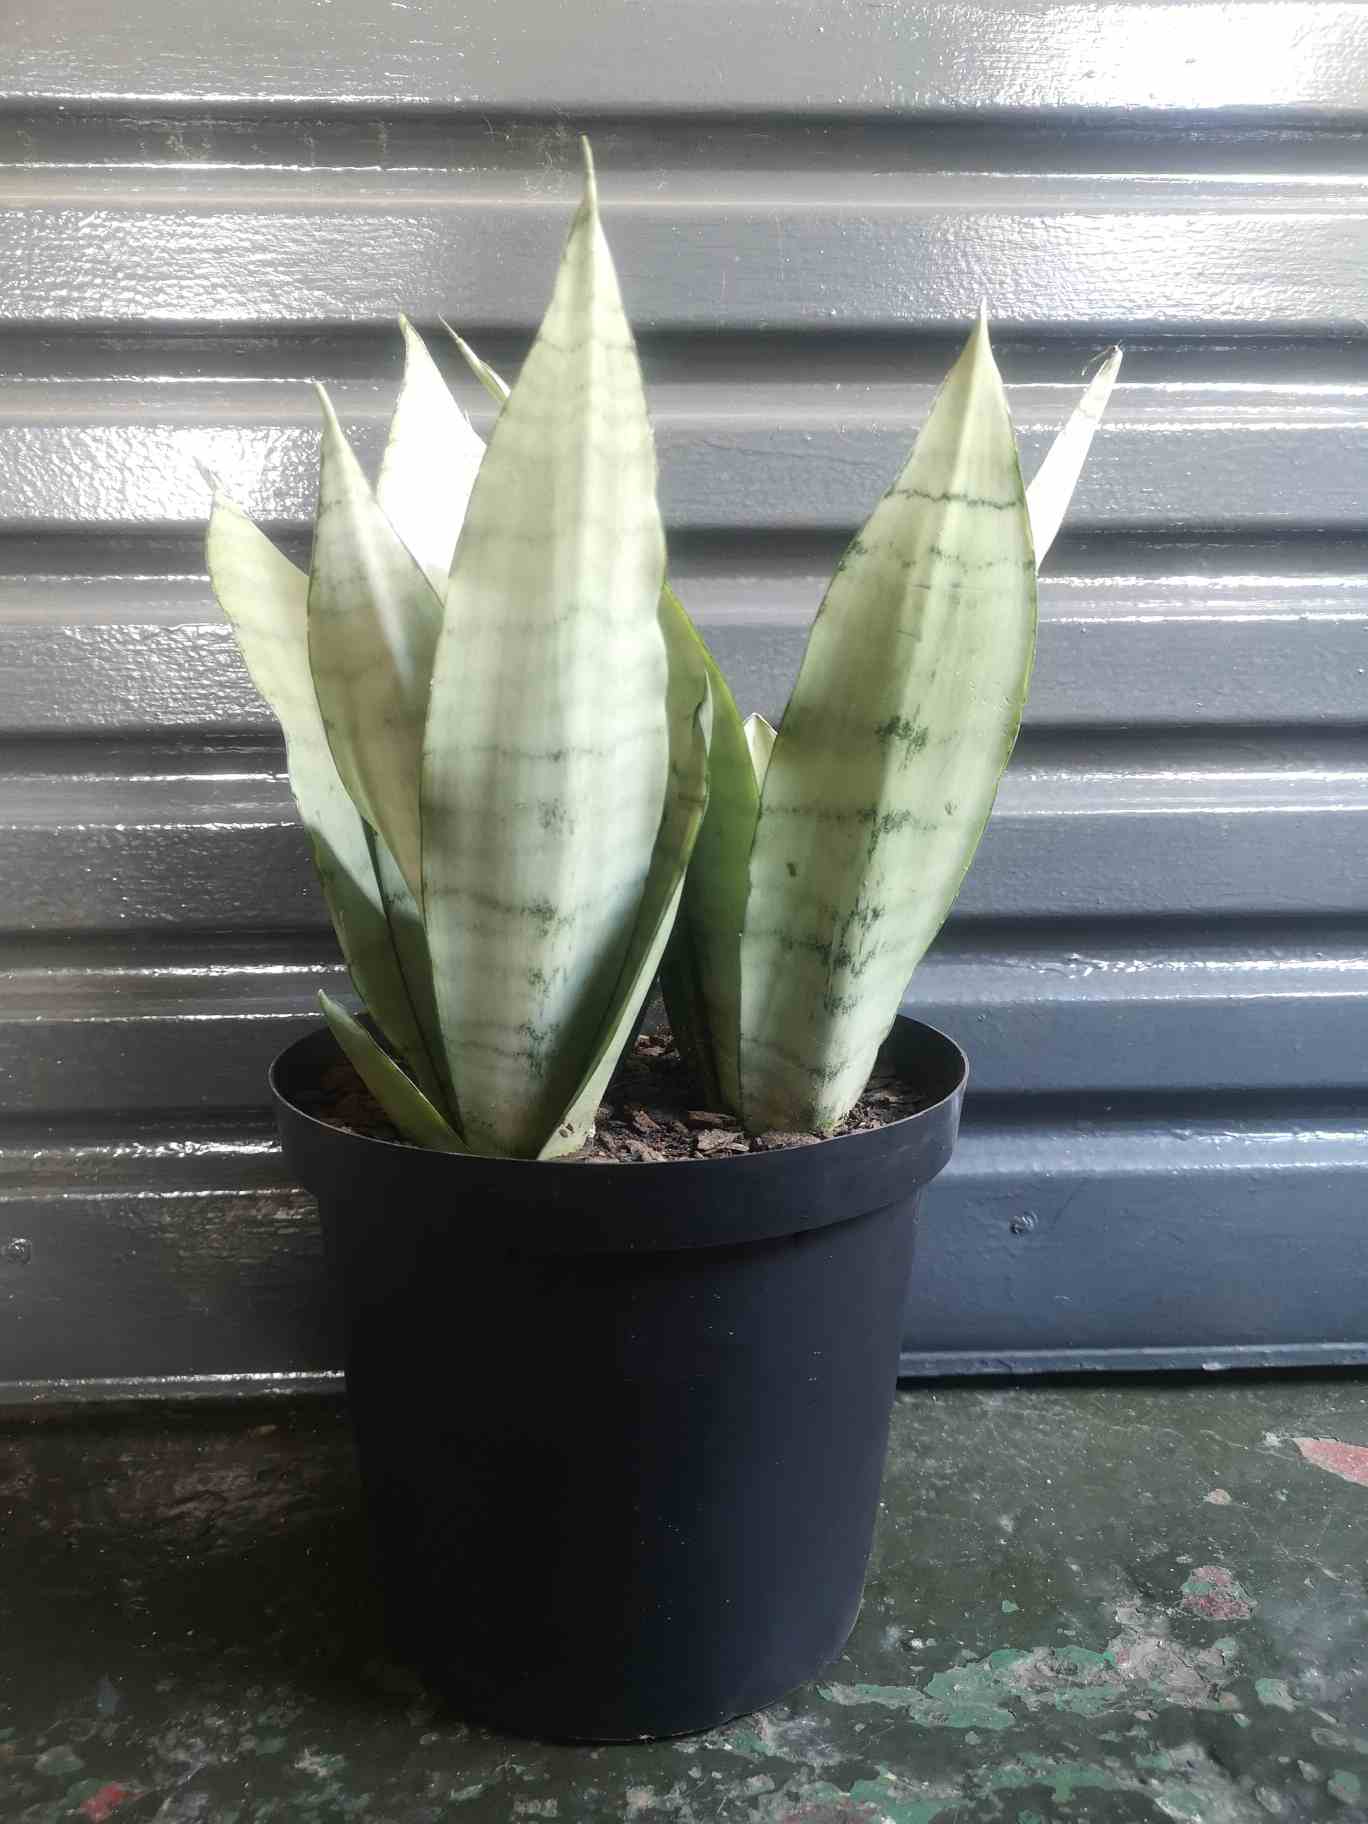 Snake Plant - Moonshine Large Mother in laws tongue